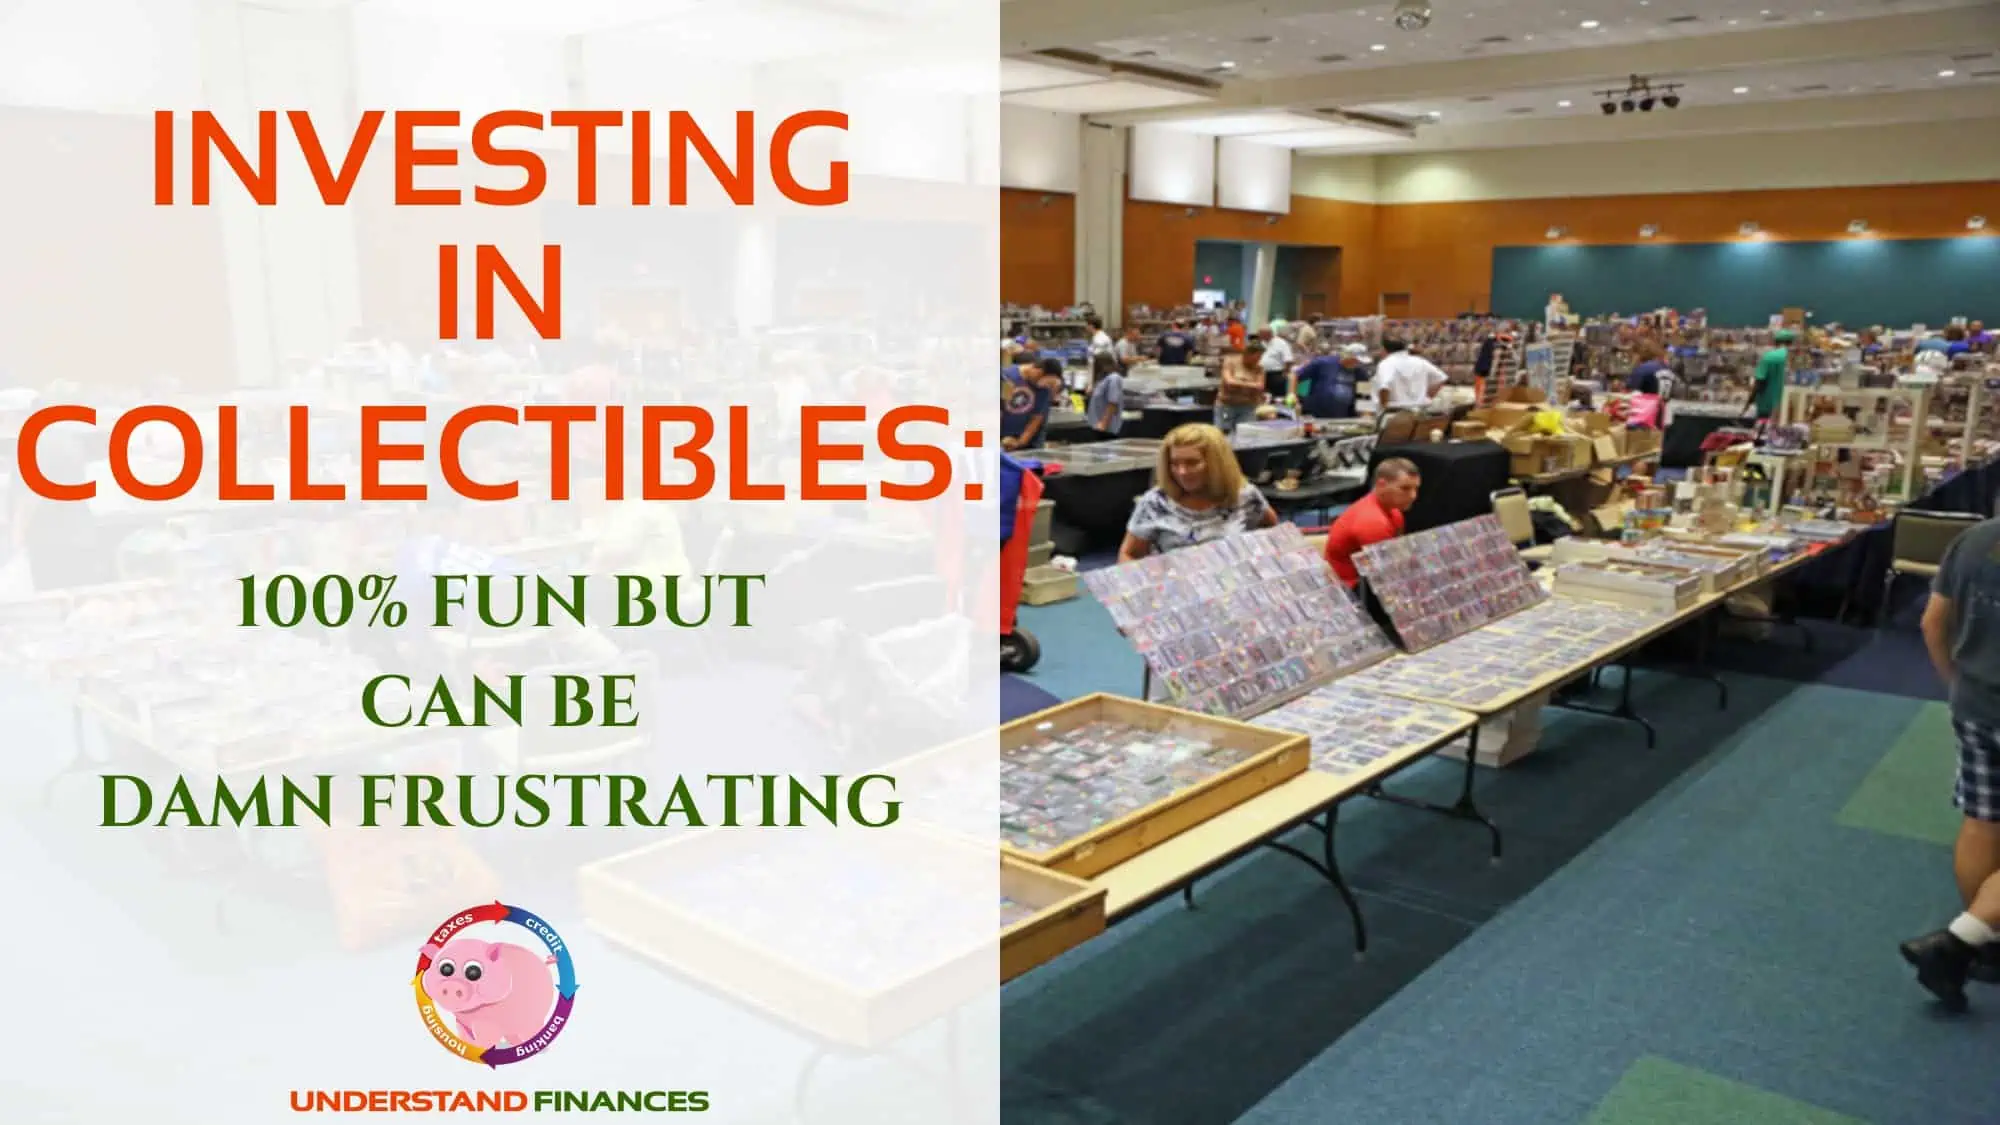 Investing In Collectibles: 100% Fun But Can Be Costly